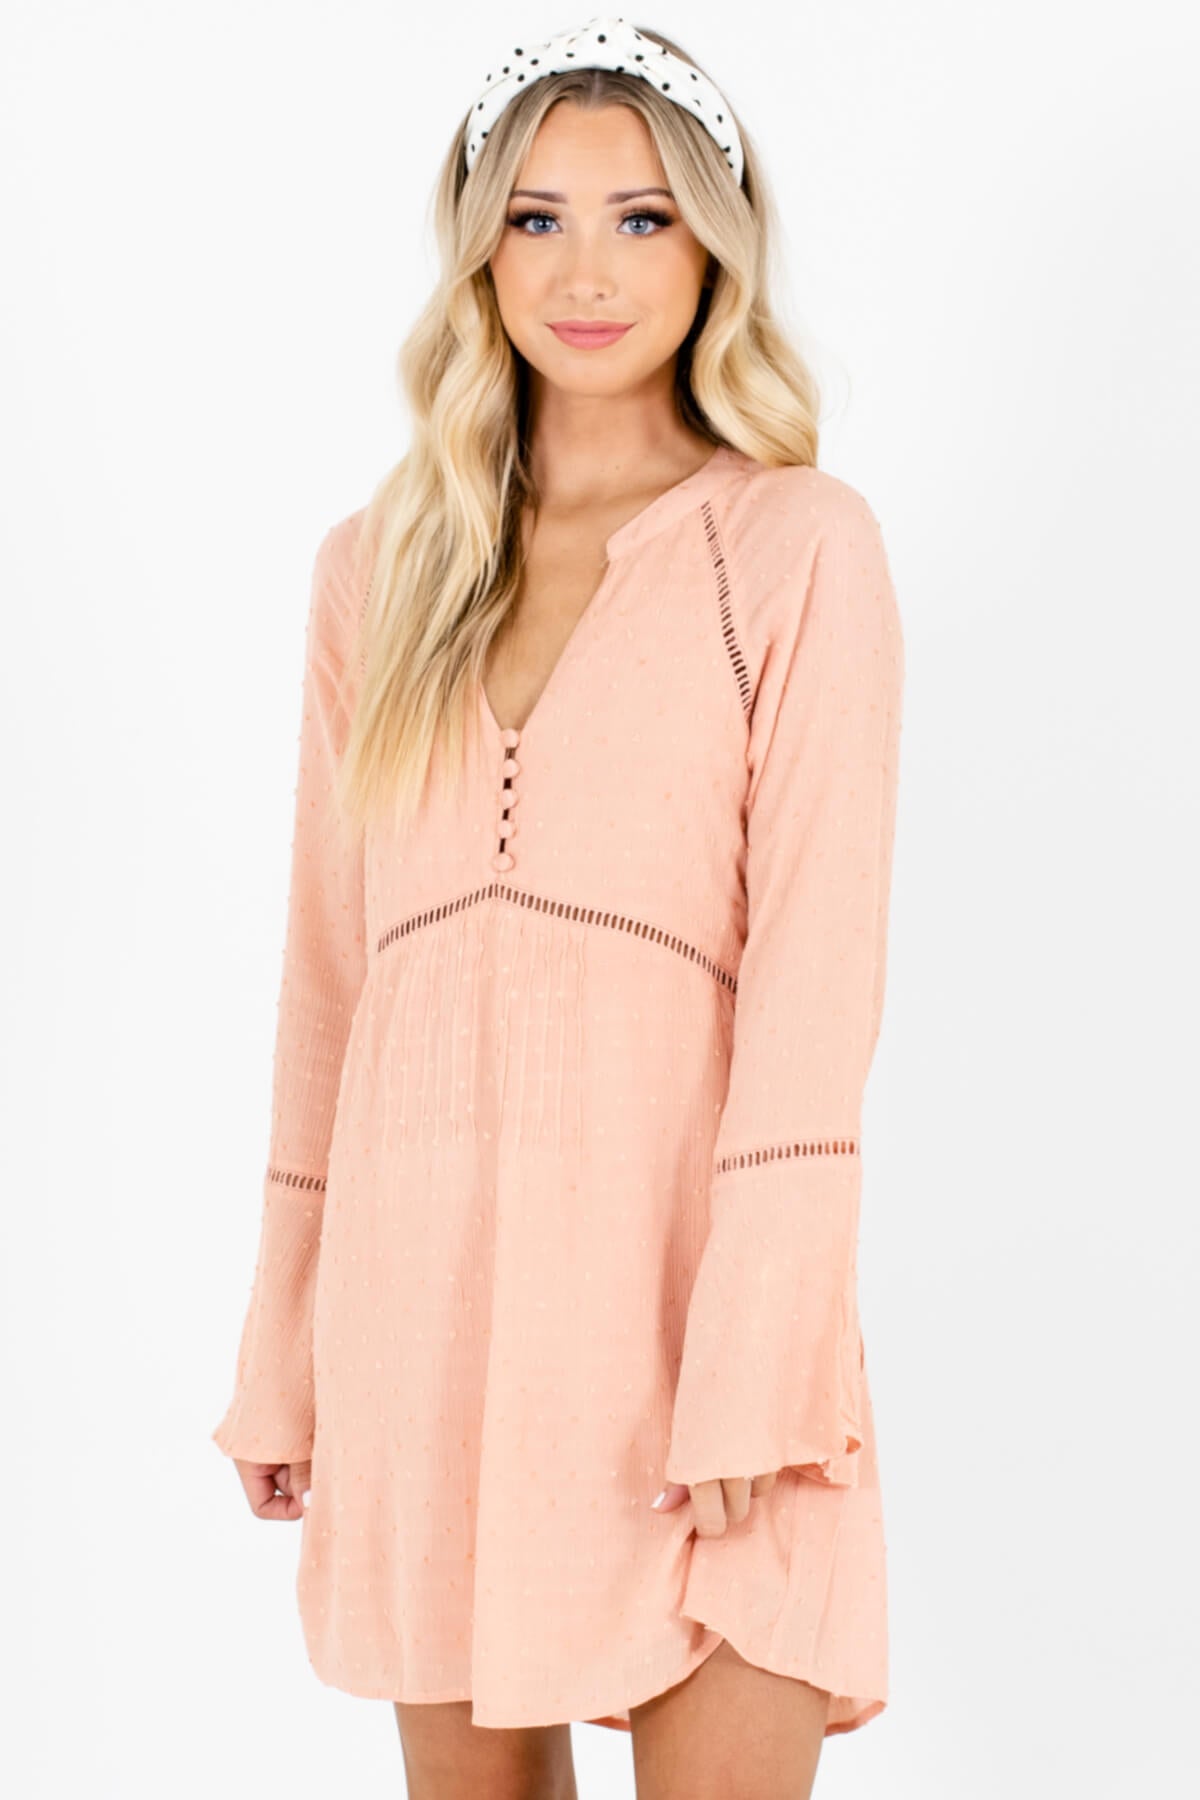 Pink Ladder Lace Textured Polka Dot Mini Dresses with Bell Sleeves